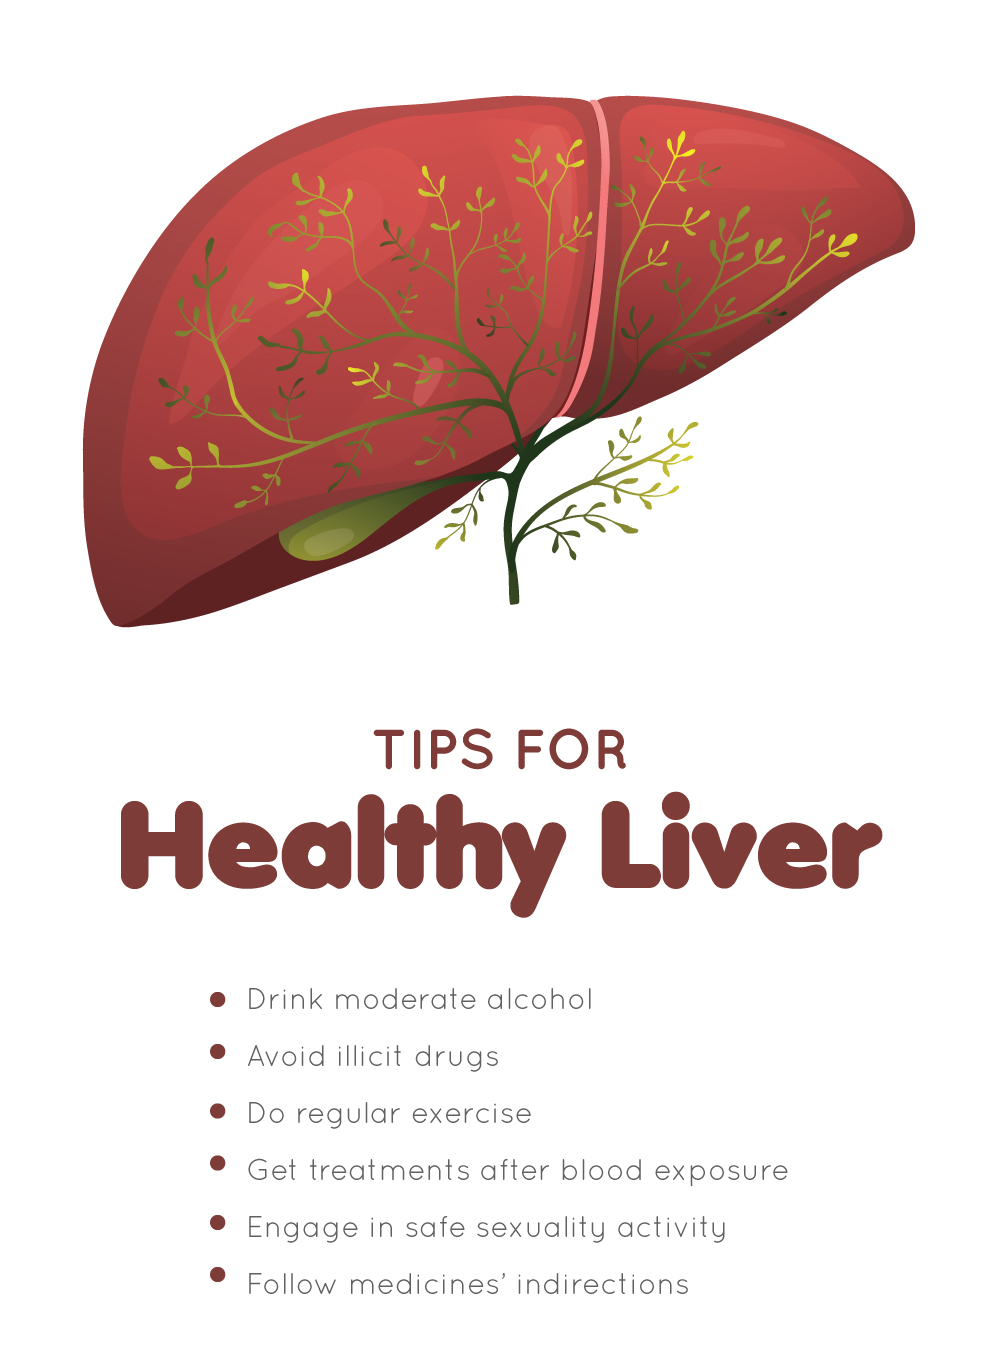 Tips for healthy Liver